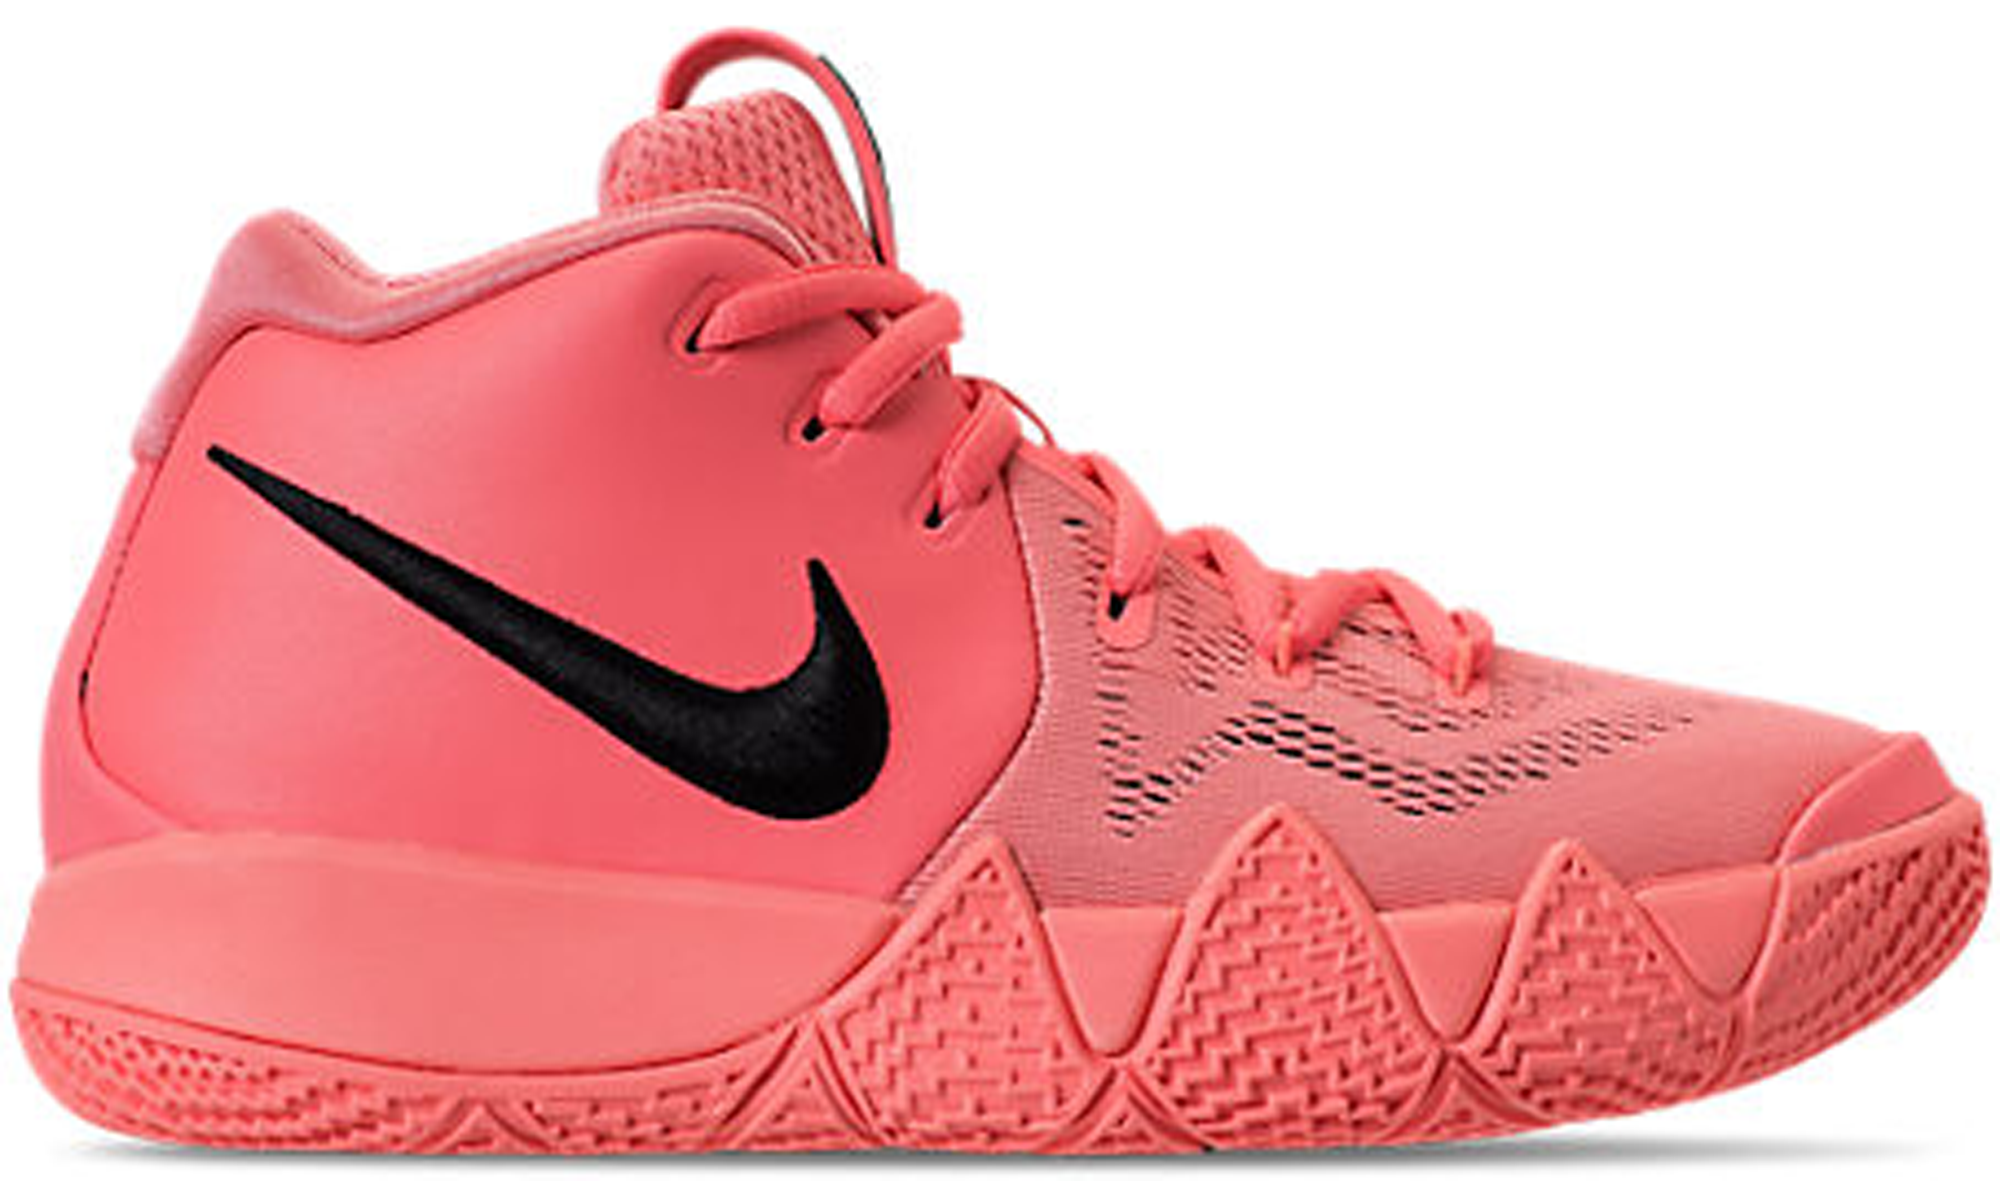 Nike Kyrie 4 Atomic Pink (GS) - AA2897-601